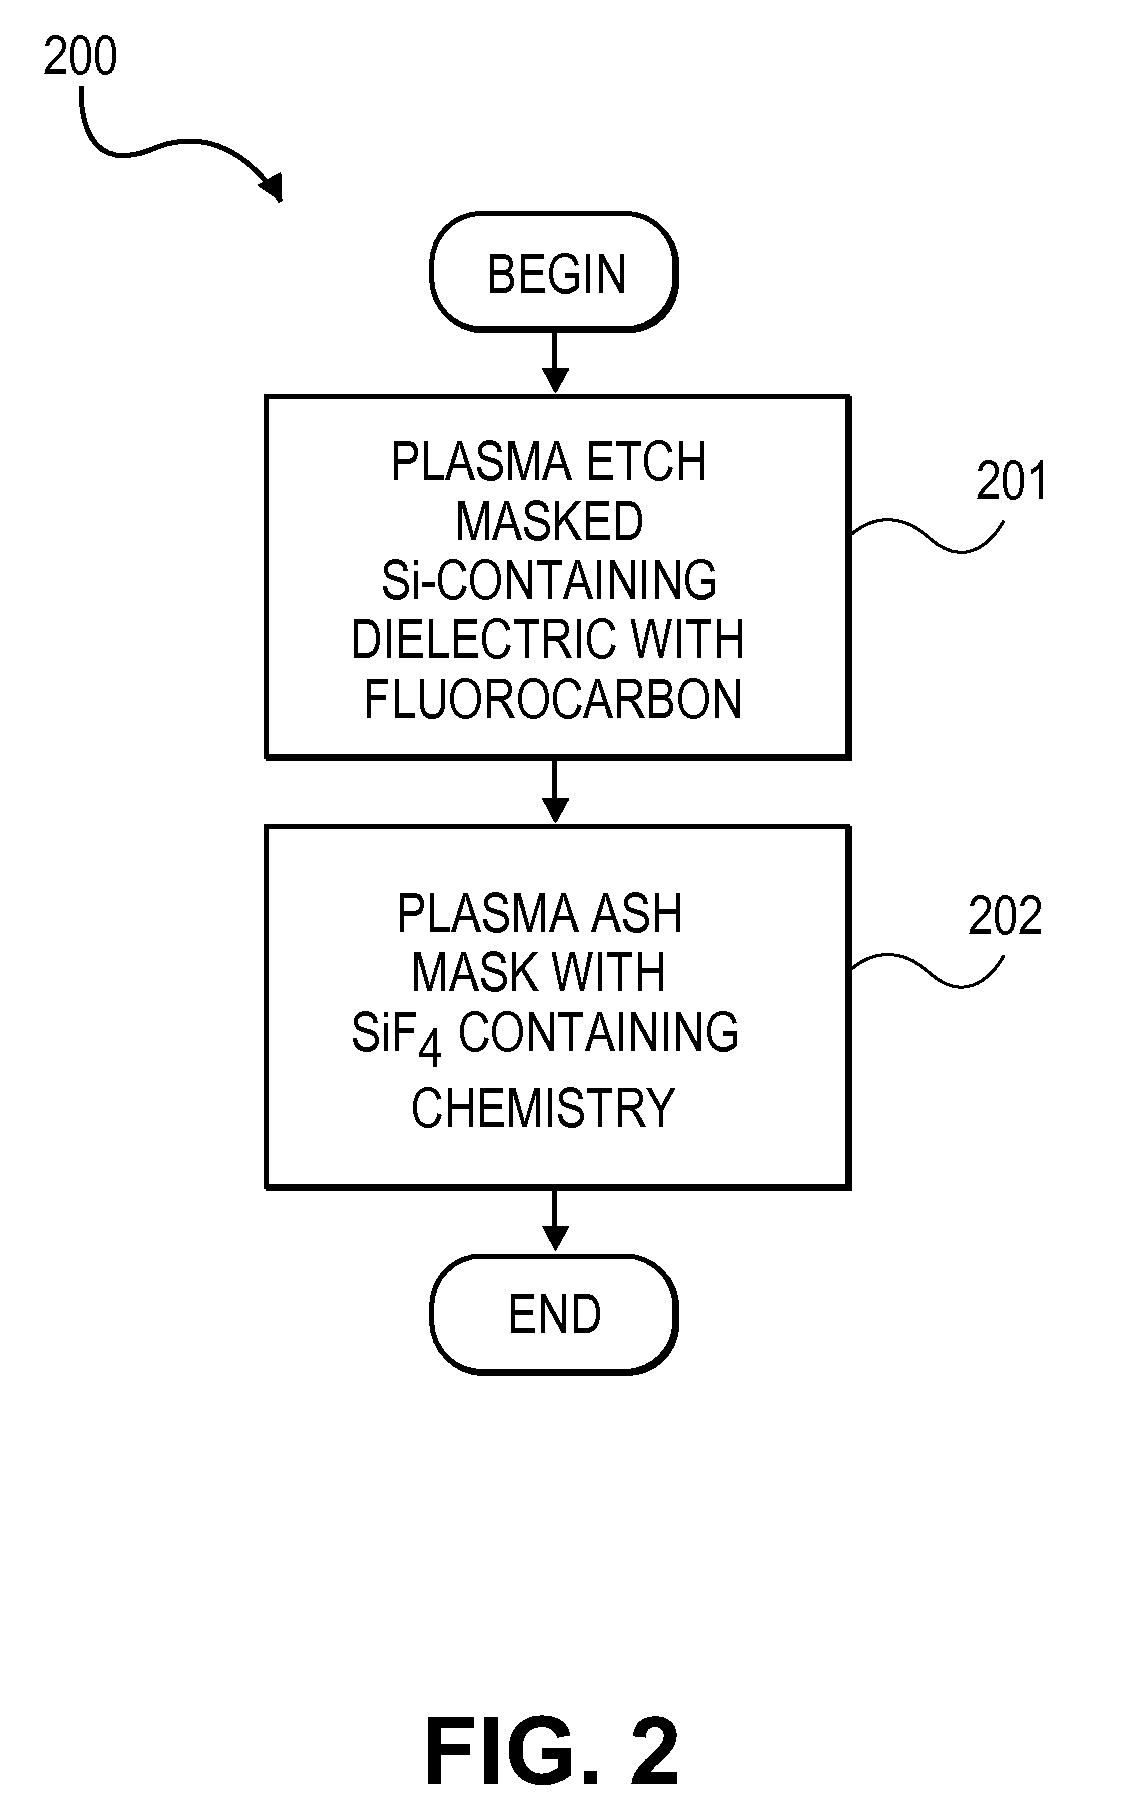 Plasma-based organic mask removal with silicon fluoride